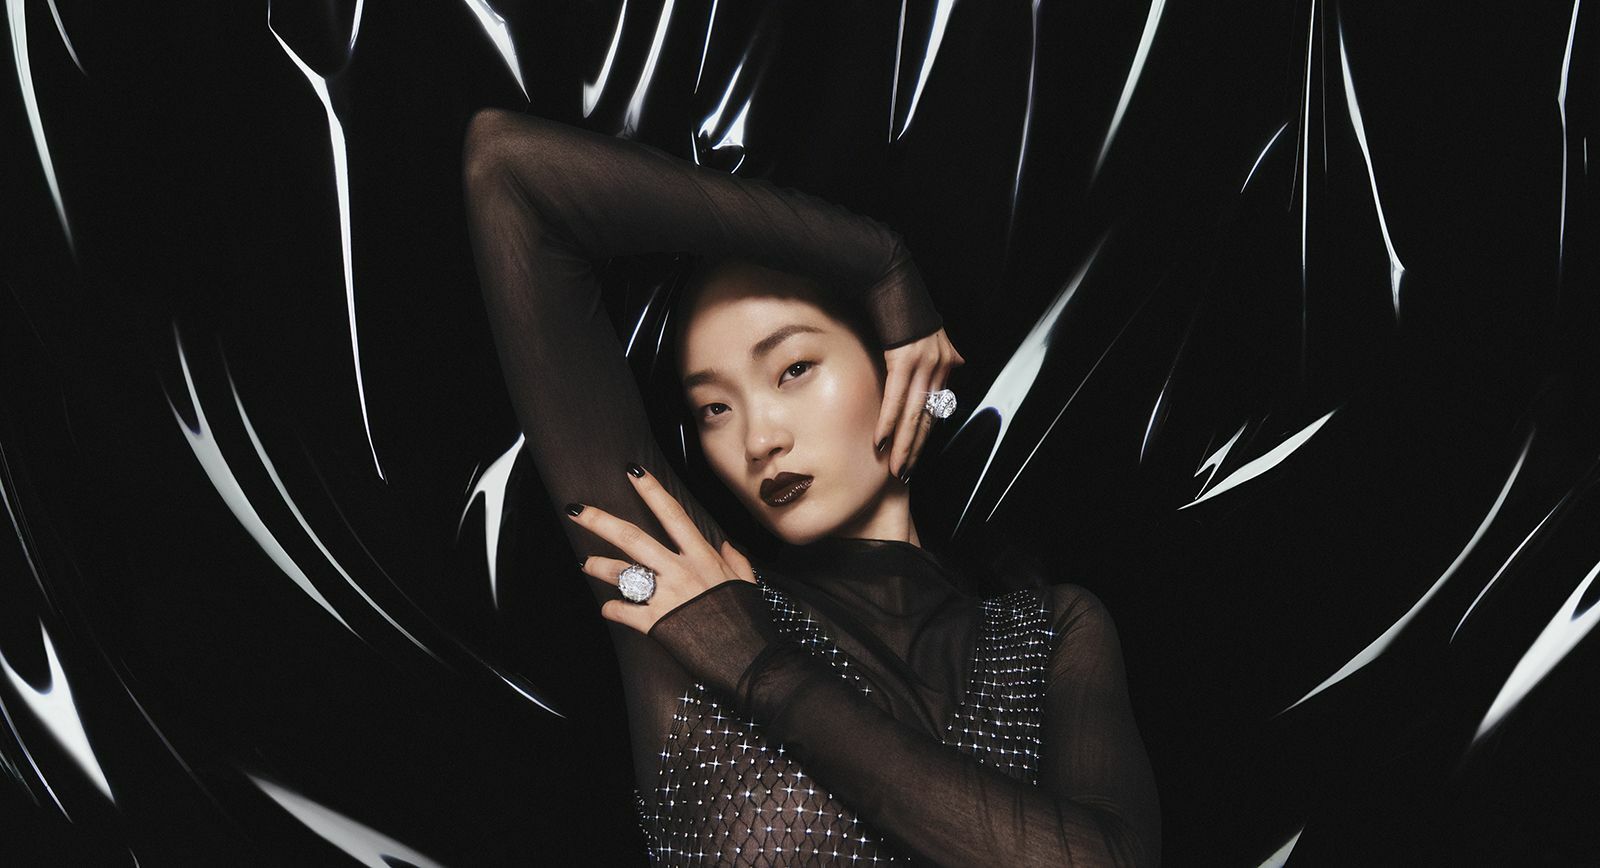 A model wears the Frozen Capture ring from the De Beers Jewellers The Alchemist of Light High Jewellery collection